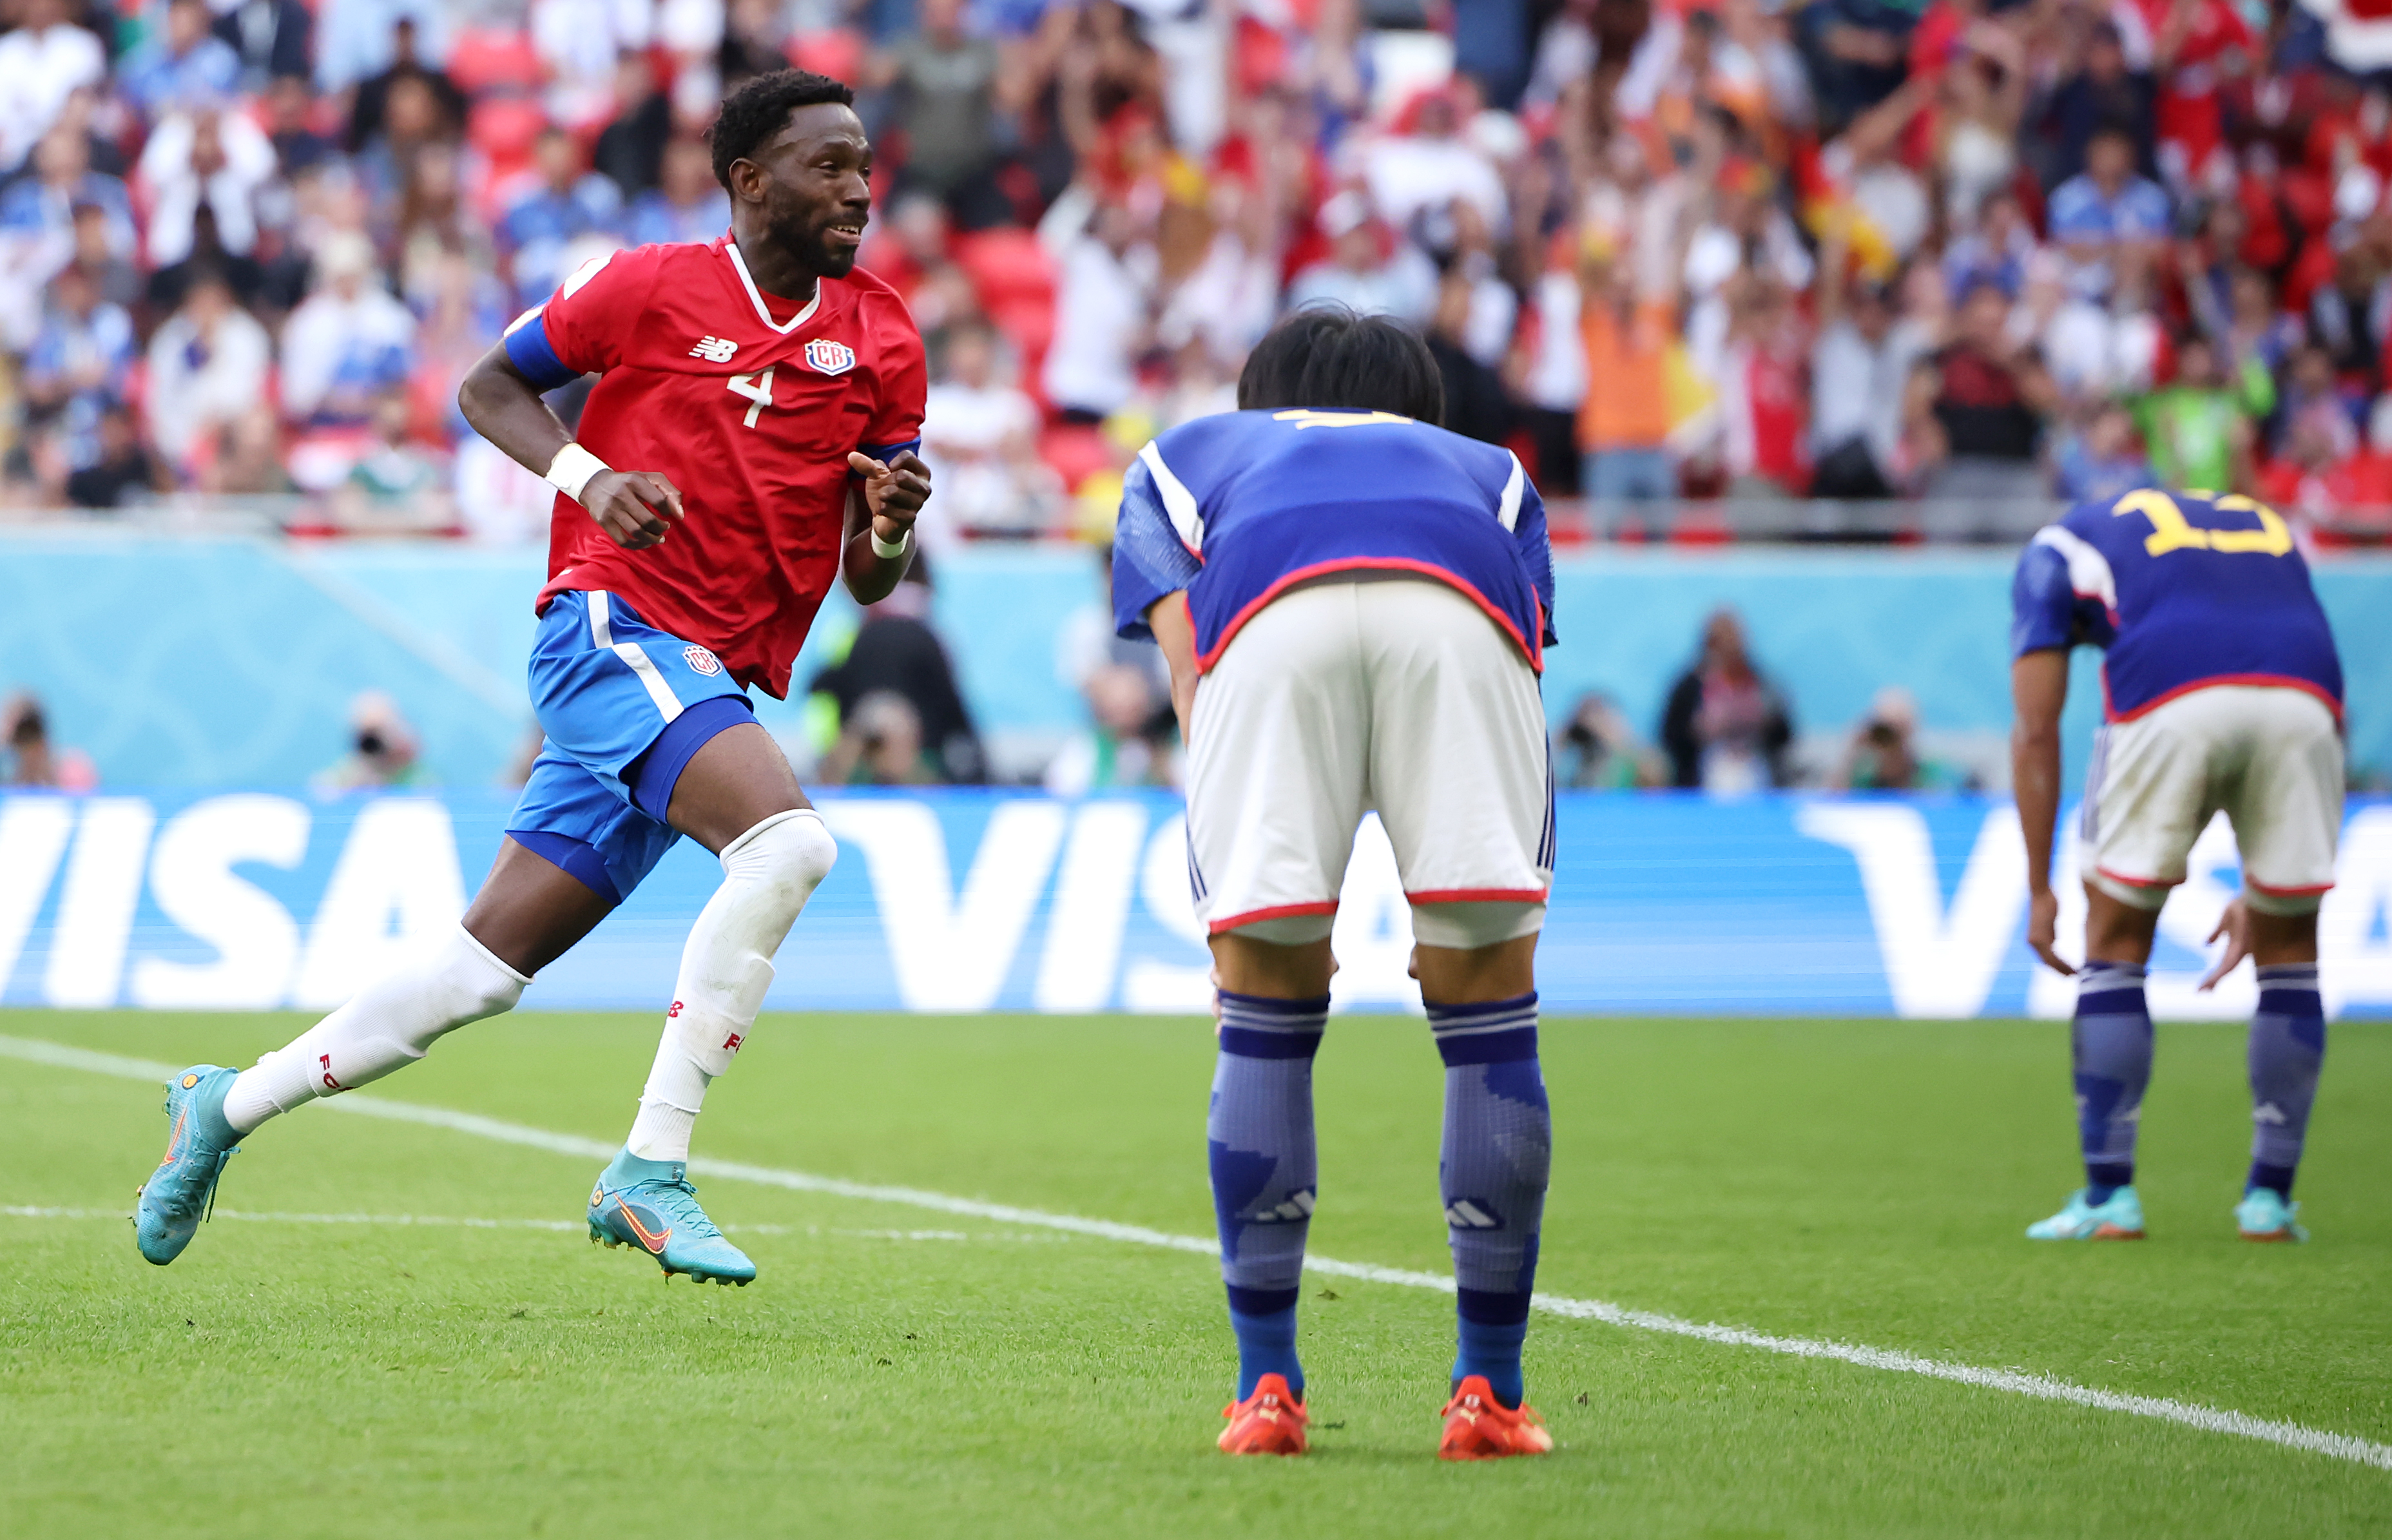 Fuller the hero as late goal lifts Costa Rica over Japan